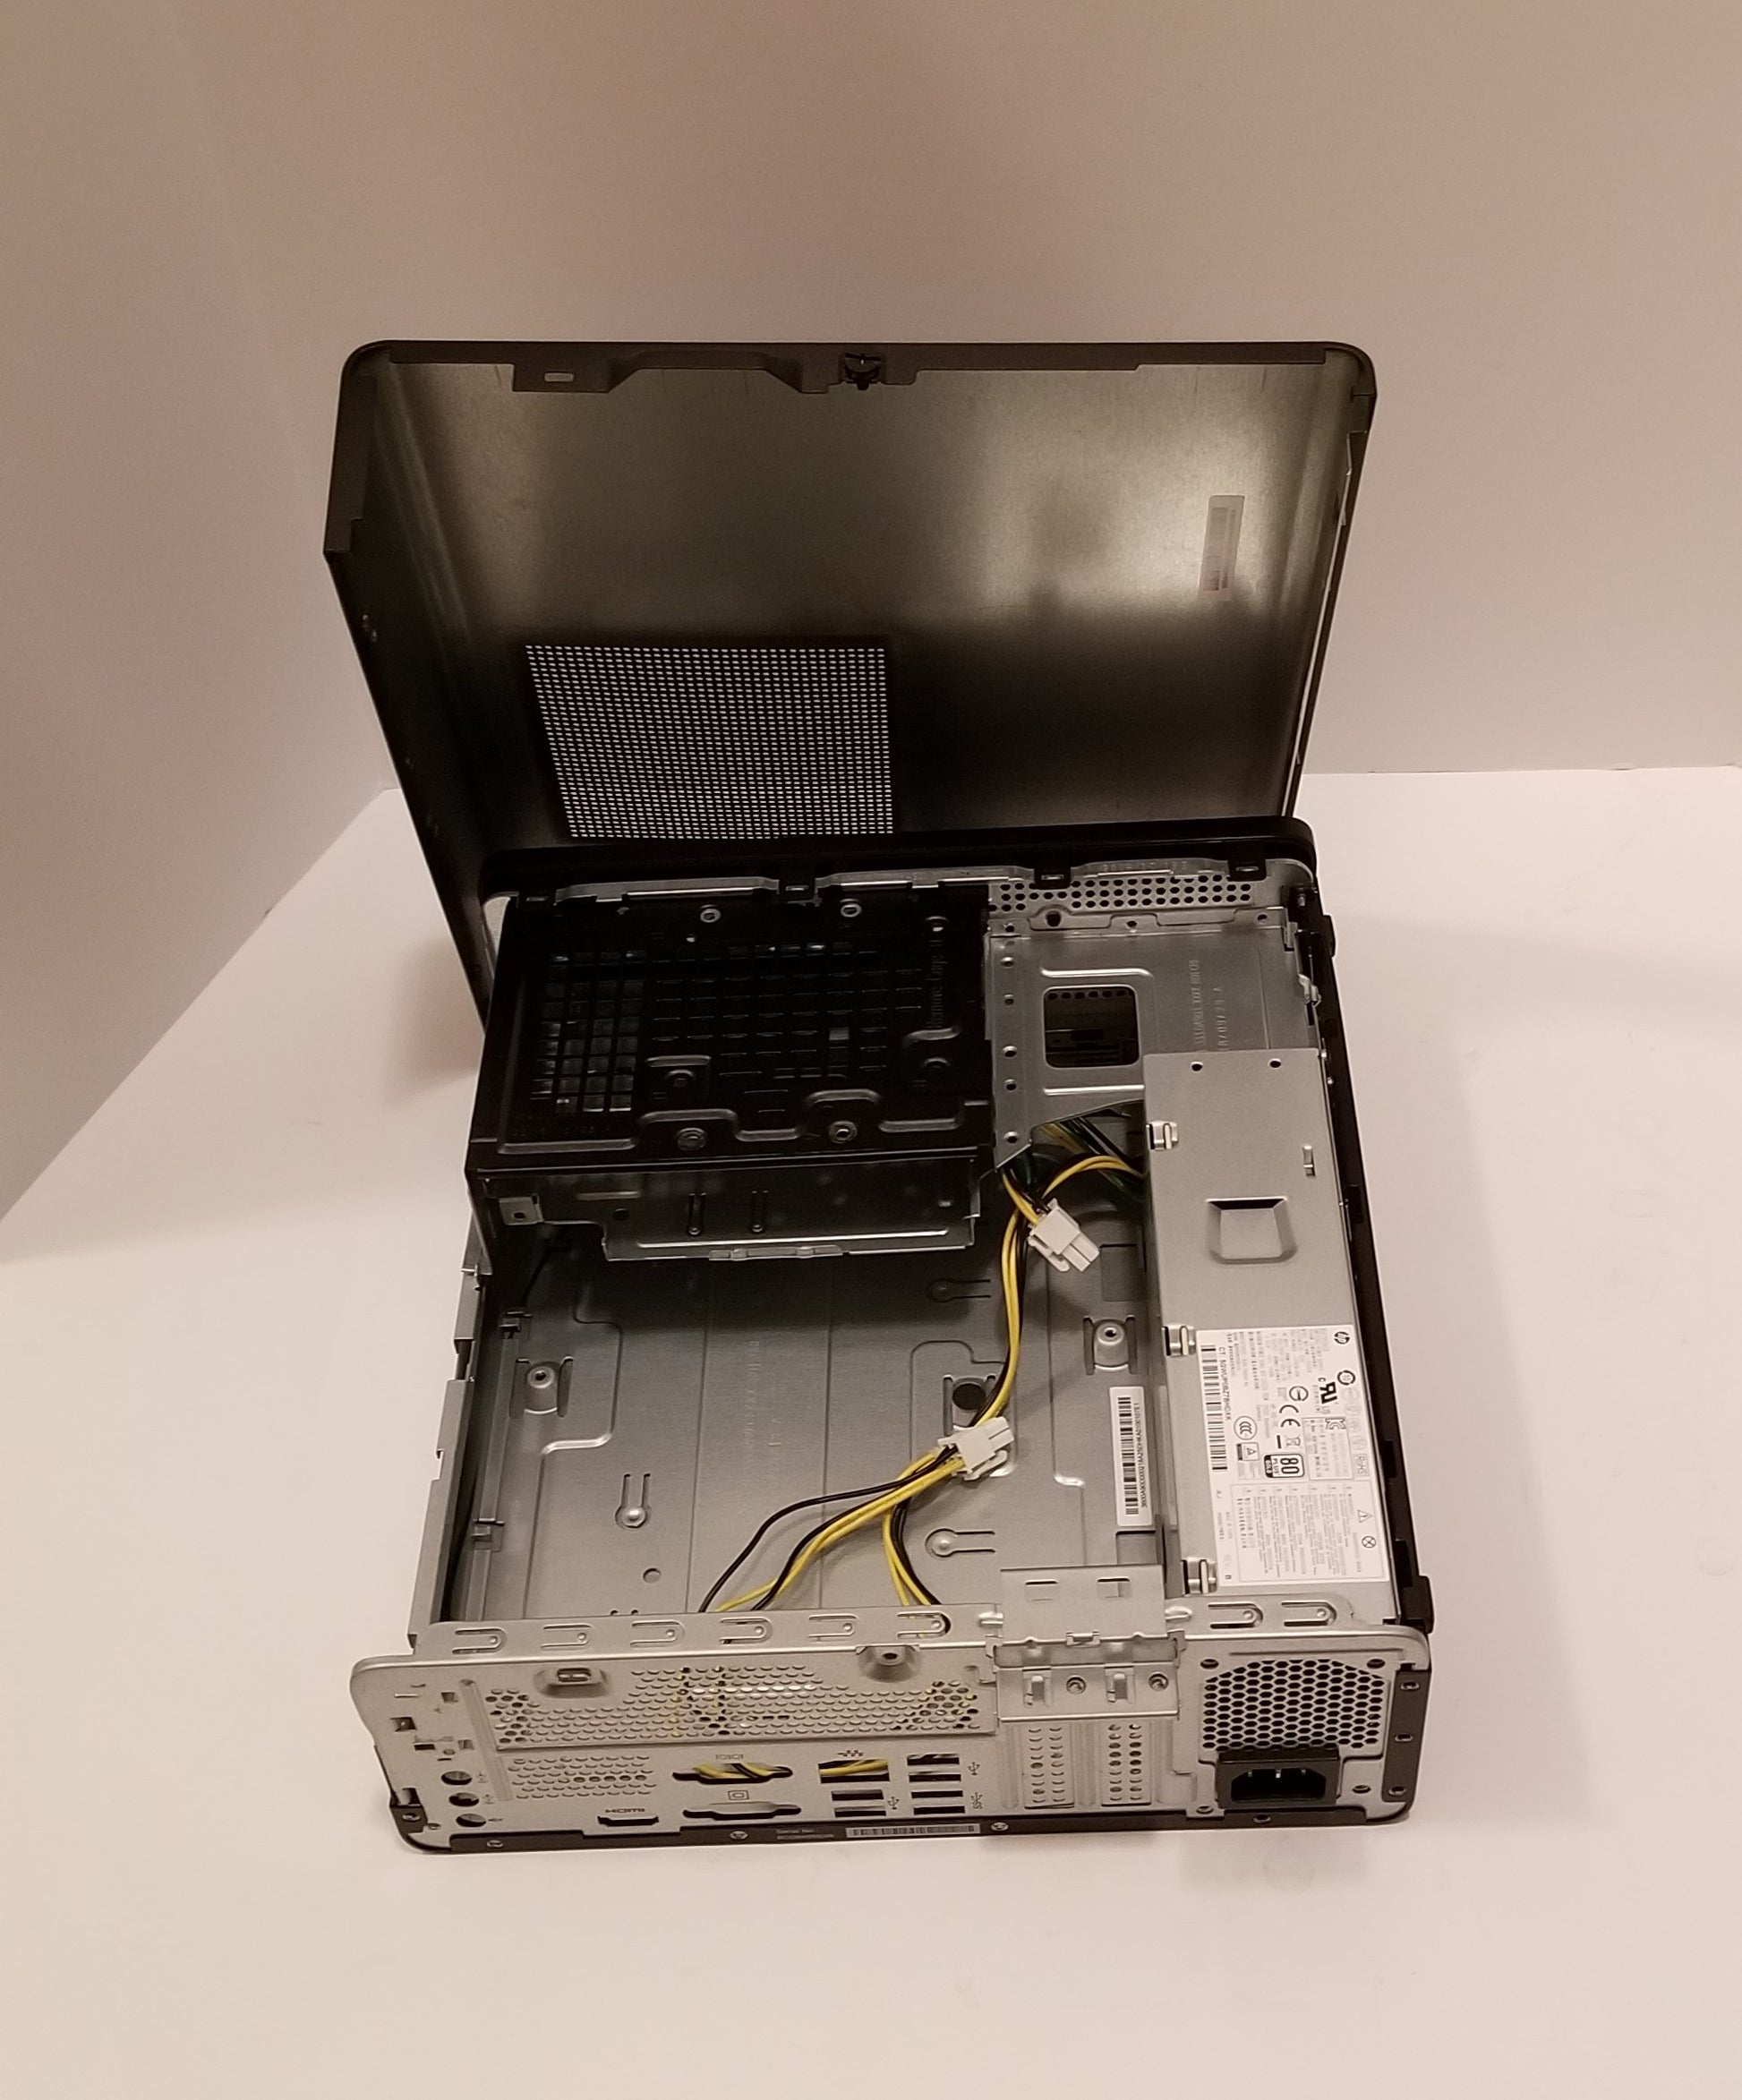 HP Slim 290-p0043w Chassis Case and Power Supply - Rekes Sales